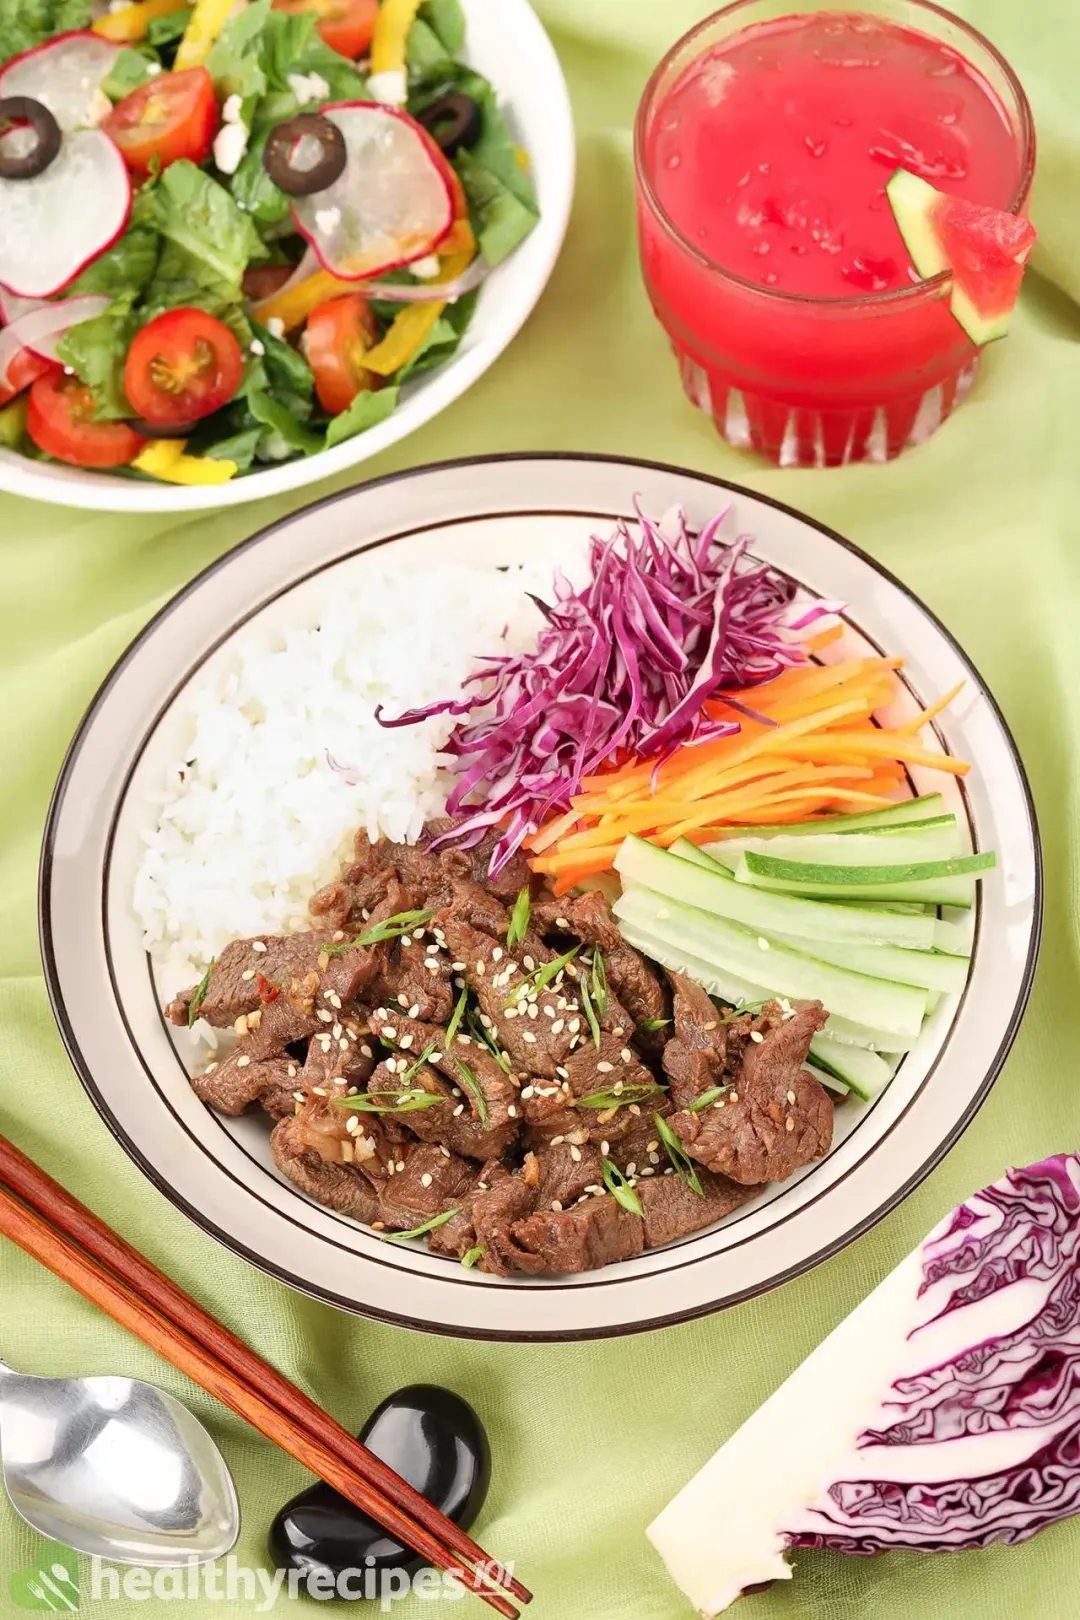 What to Serve With Bulgogi Beef